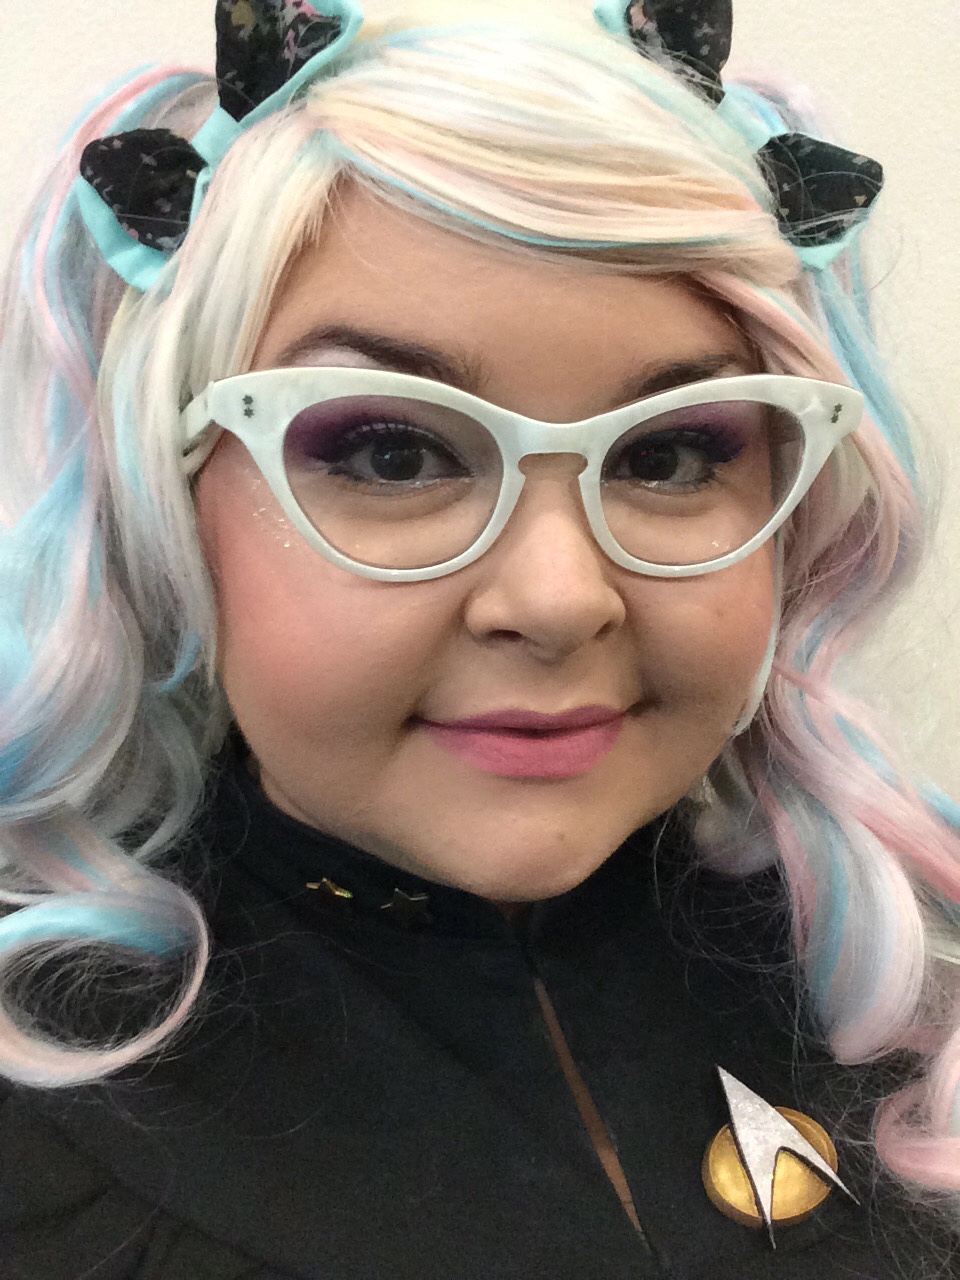 Cosplay Spotlight: Body Positive, Feminist Cosplay by Kris of Fat and Nerdy Cosplay